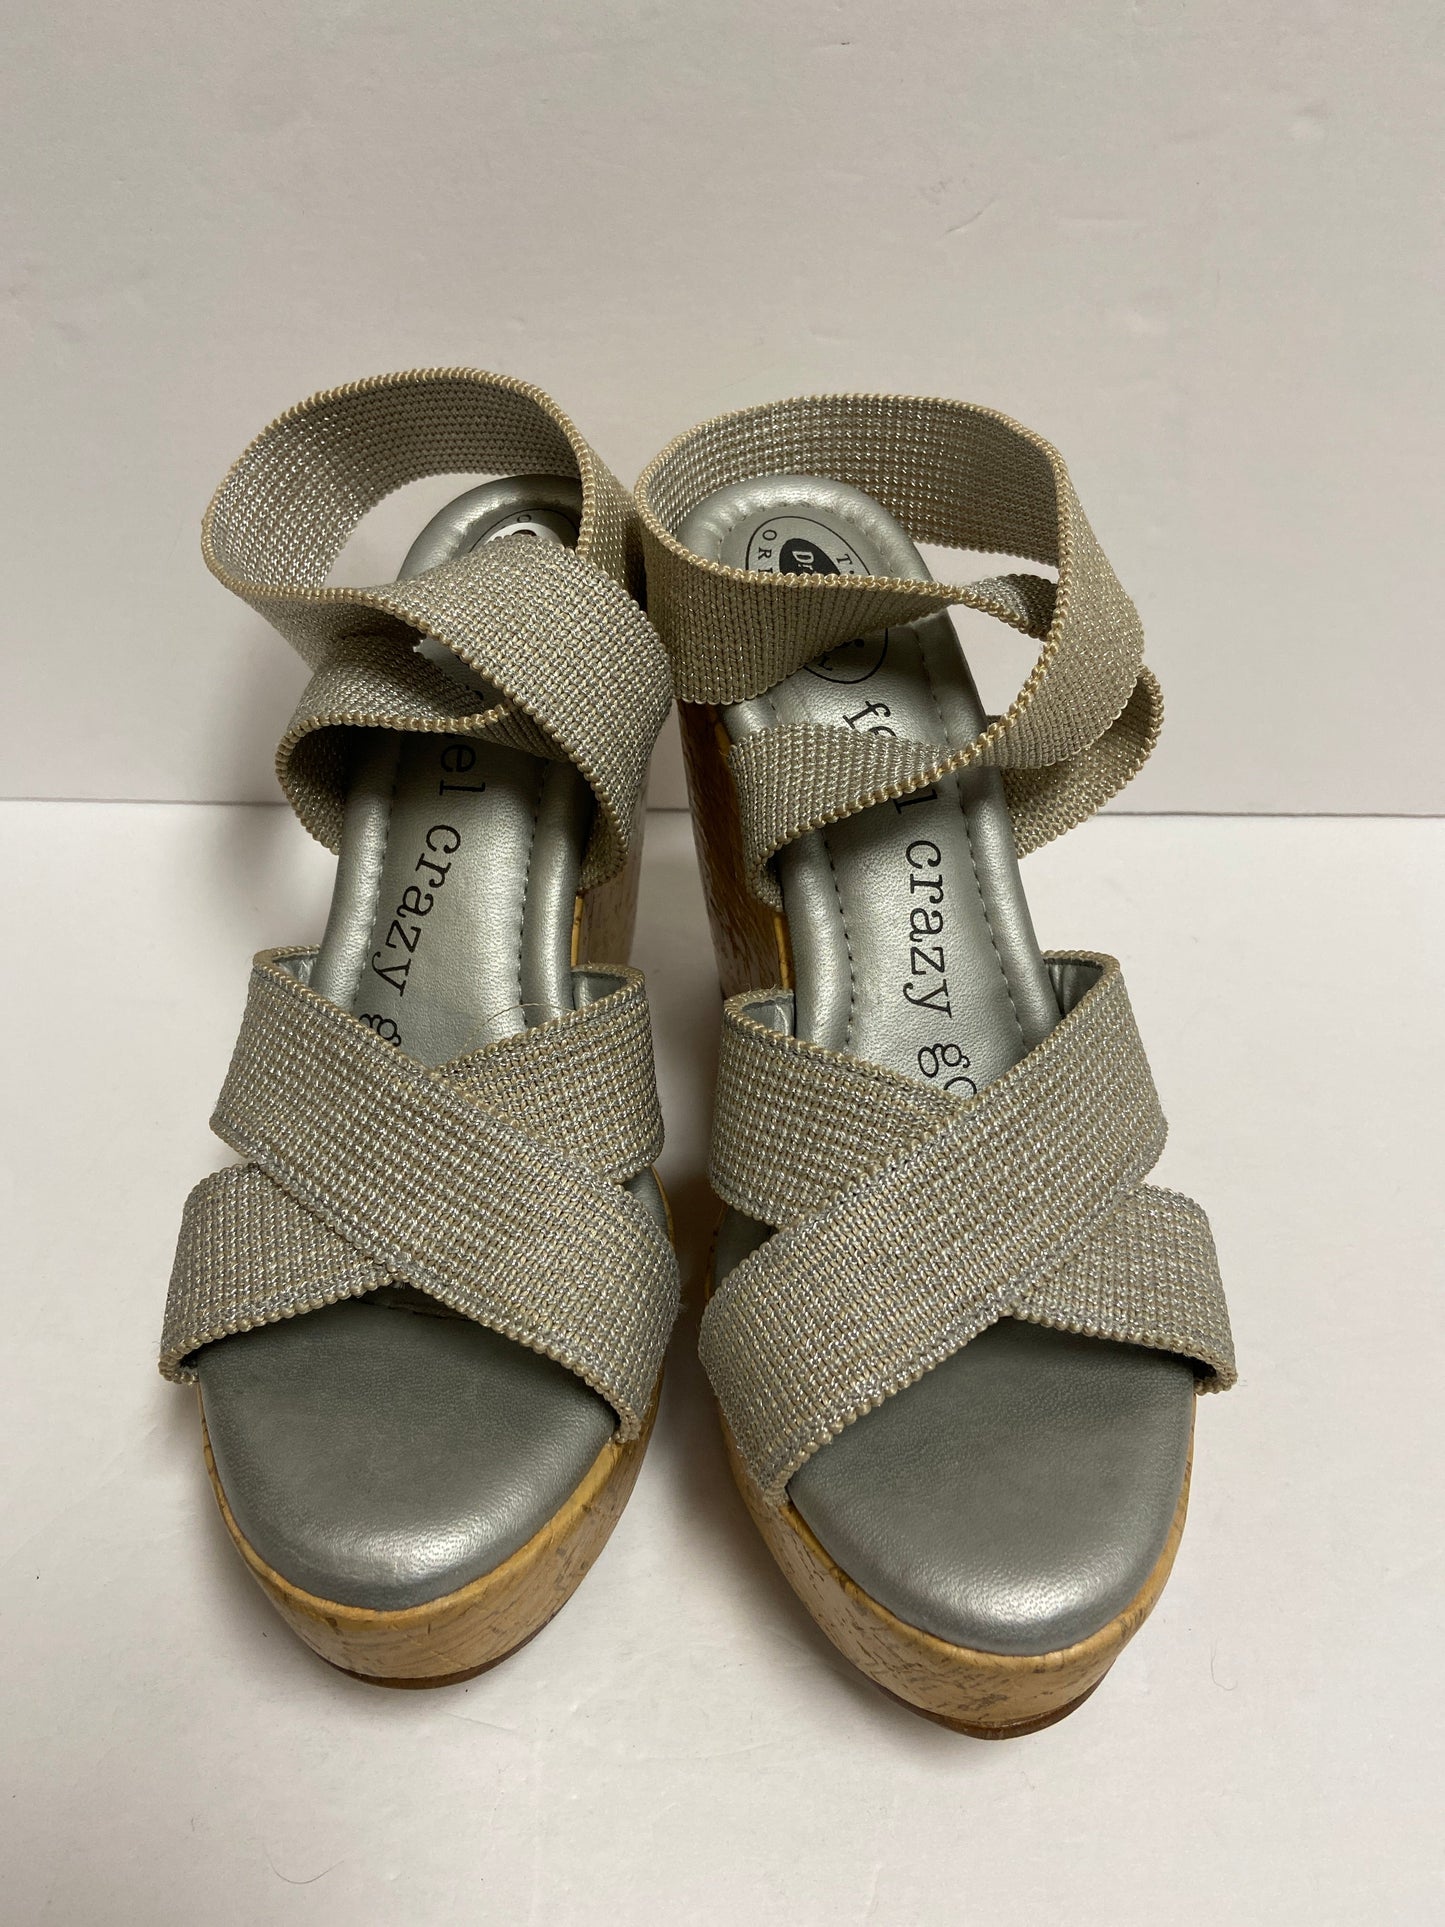 Shoes Heels Wedge By Dr Scholls  Size: 8